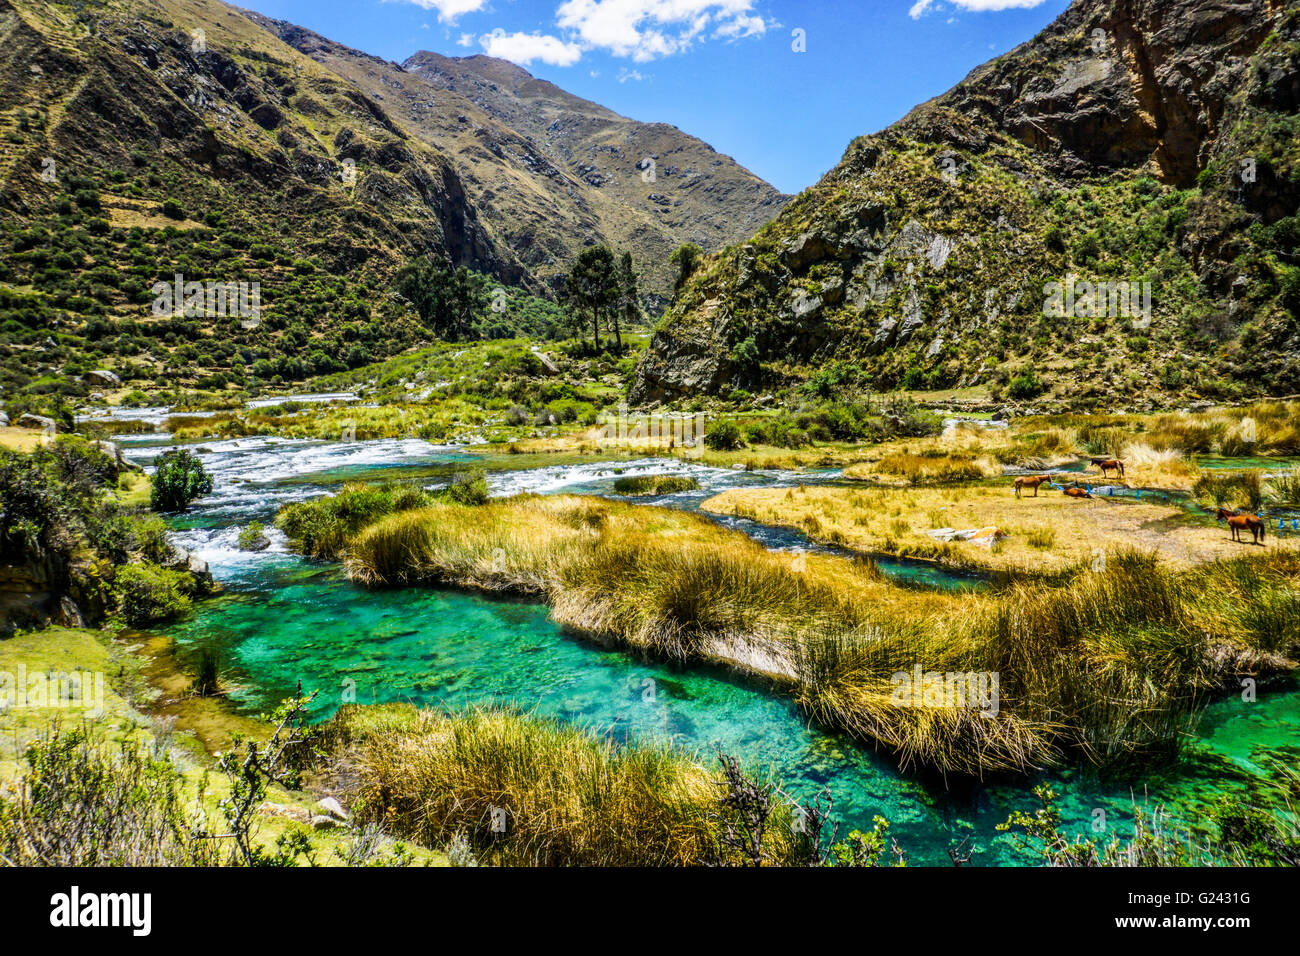 Waterscape in the Peruvian Andes. Photographed near Huancayo, Peru Stock Photo